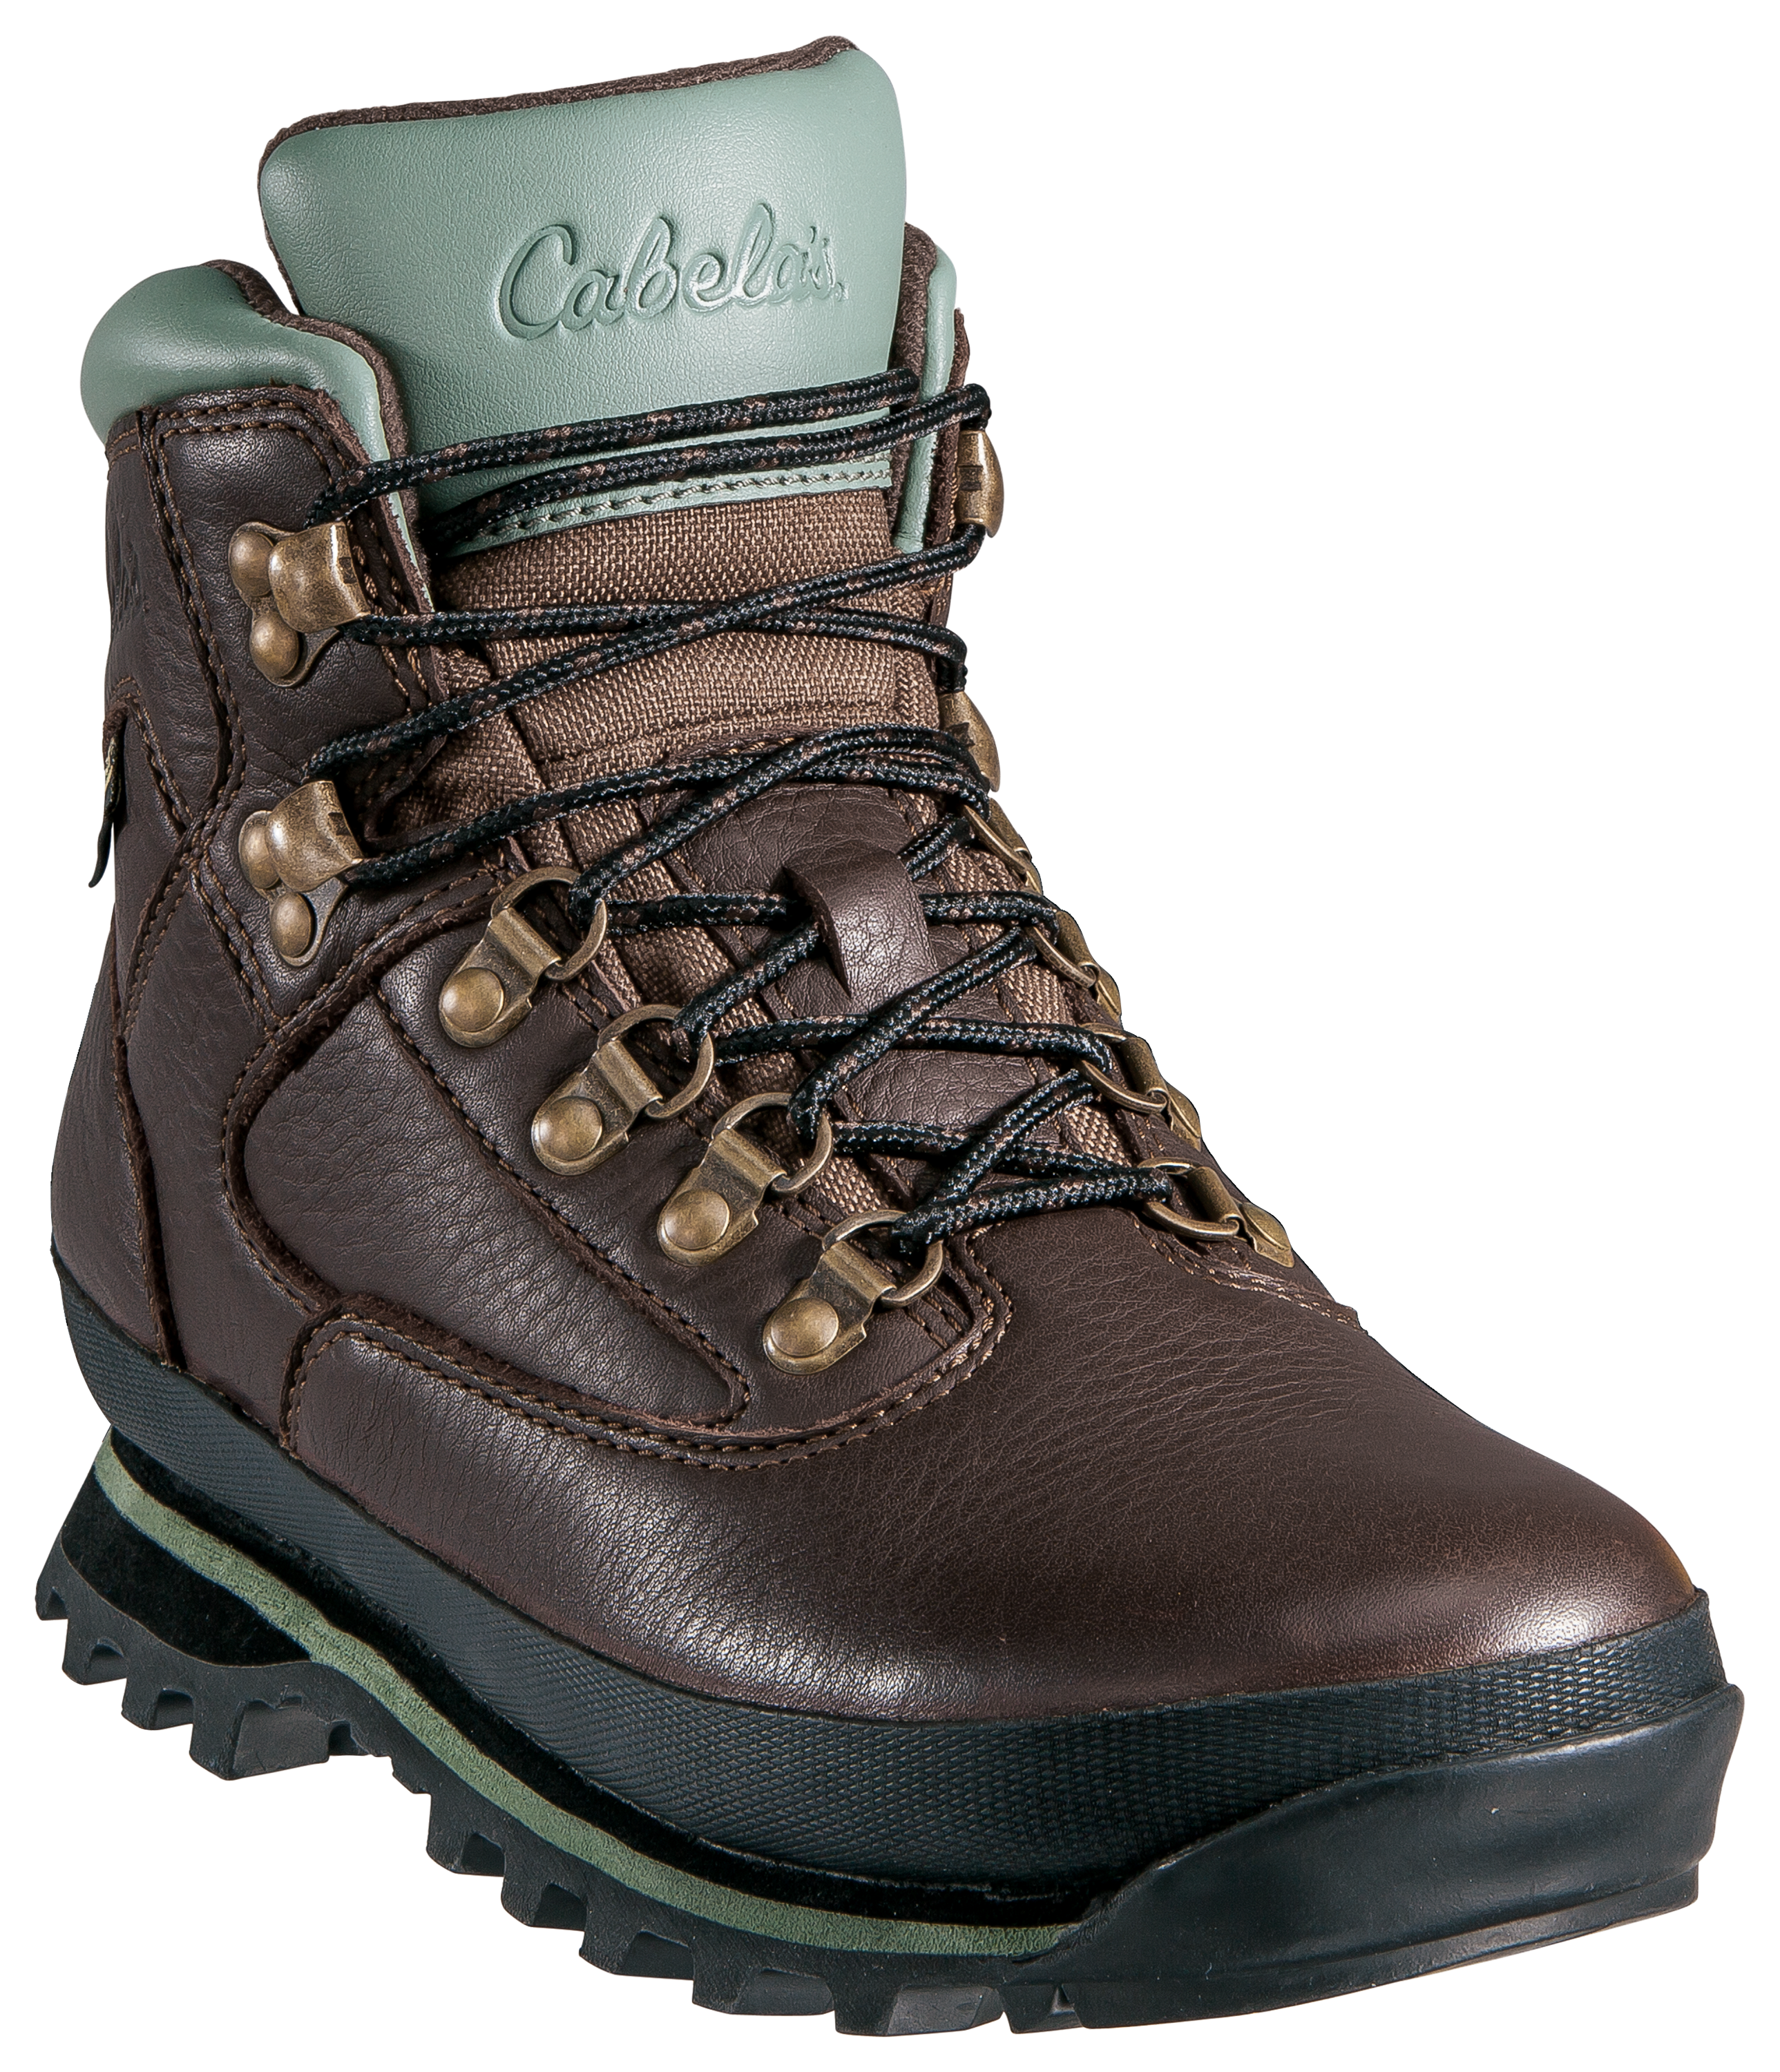 Cabela's Rimrock Mid GORE-TEX Hiking Boots for Ladies - Brown - 6.5 M